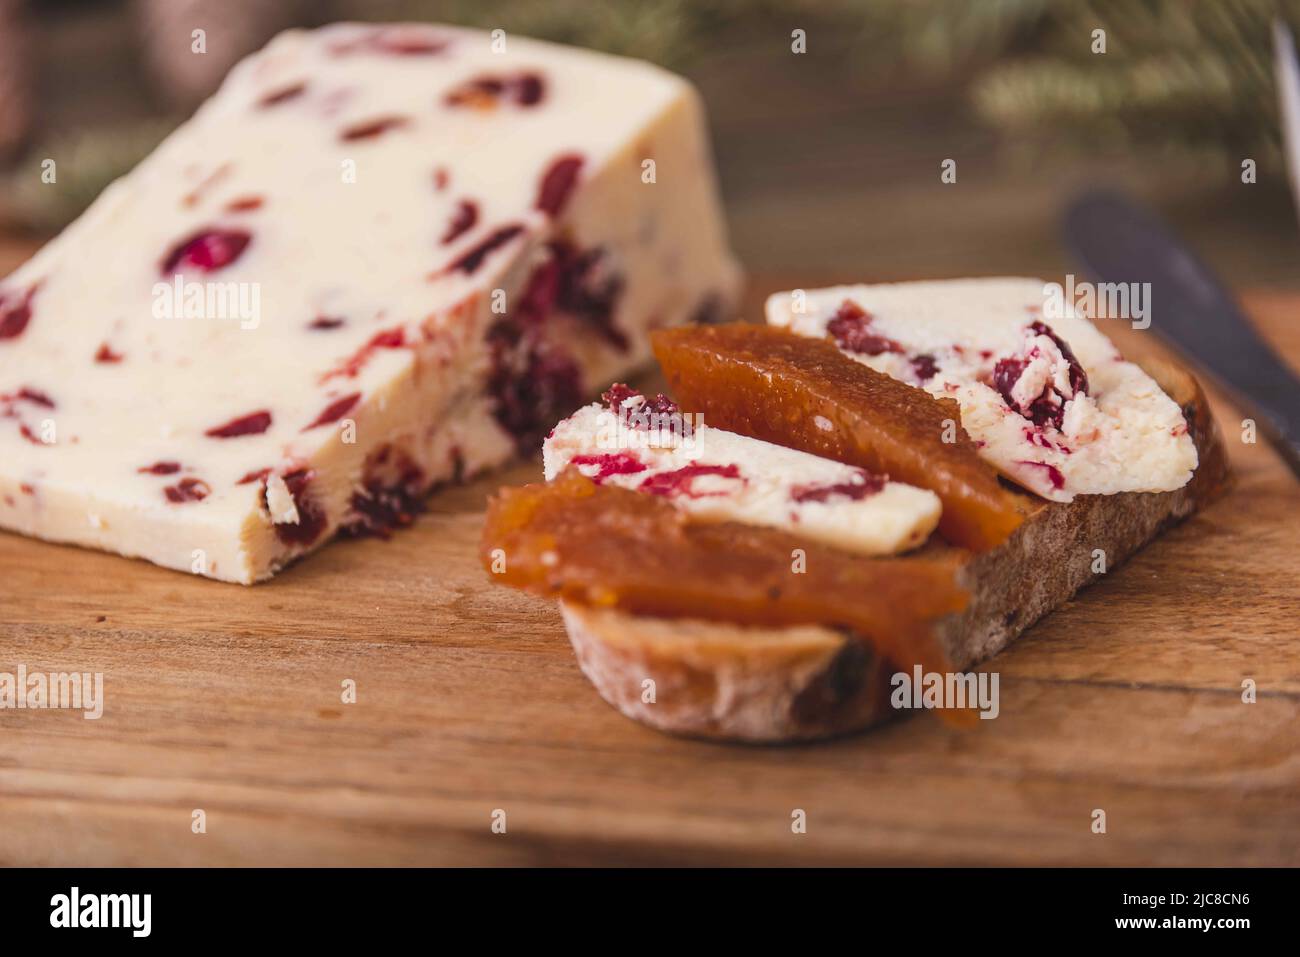 Wensleydale cheese with cranberries, red wine, honey, nuts, raisins on marble cutting board. Black concrete background. Selective focus. Stock Photo